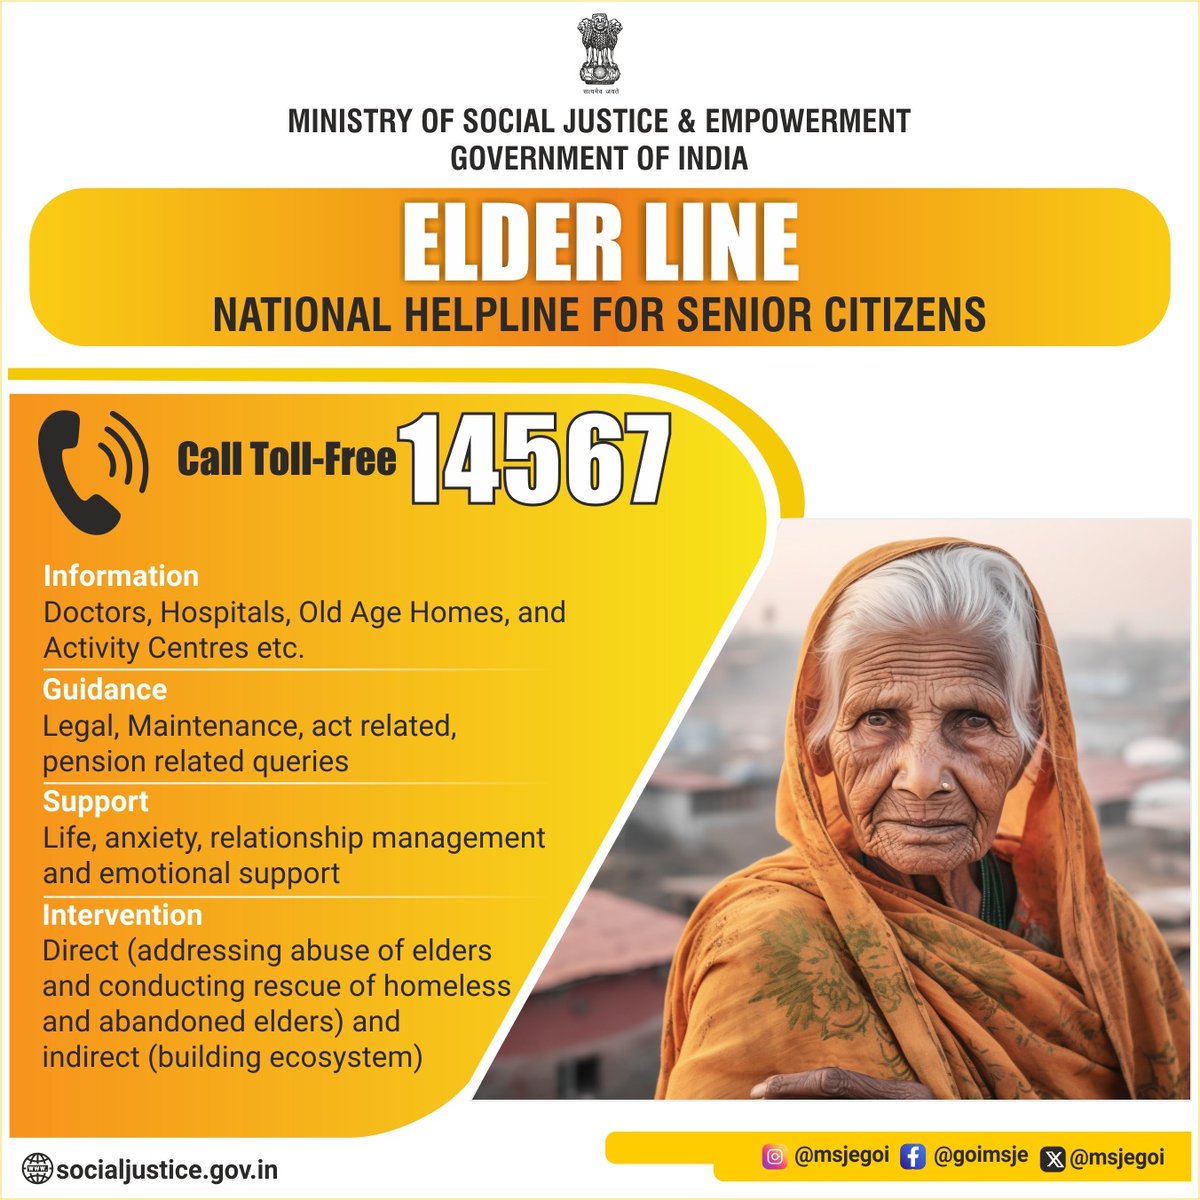 Need assistance with elderly care, pensions, legal advice, or concerned about elder abuse? 📞 Call Elder Line at 14567 – your national toll-free helpline dedicated to senior citizens.
#ElderCare #ReportElderAbuse